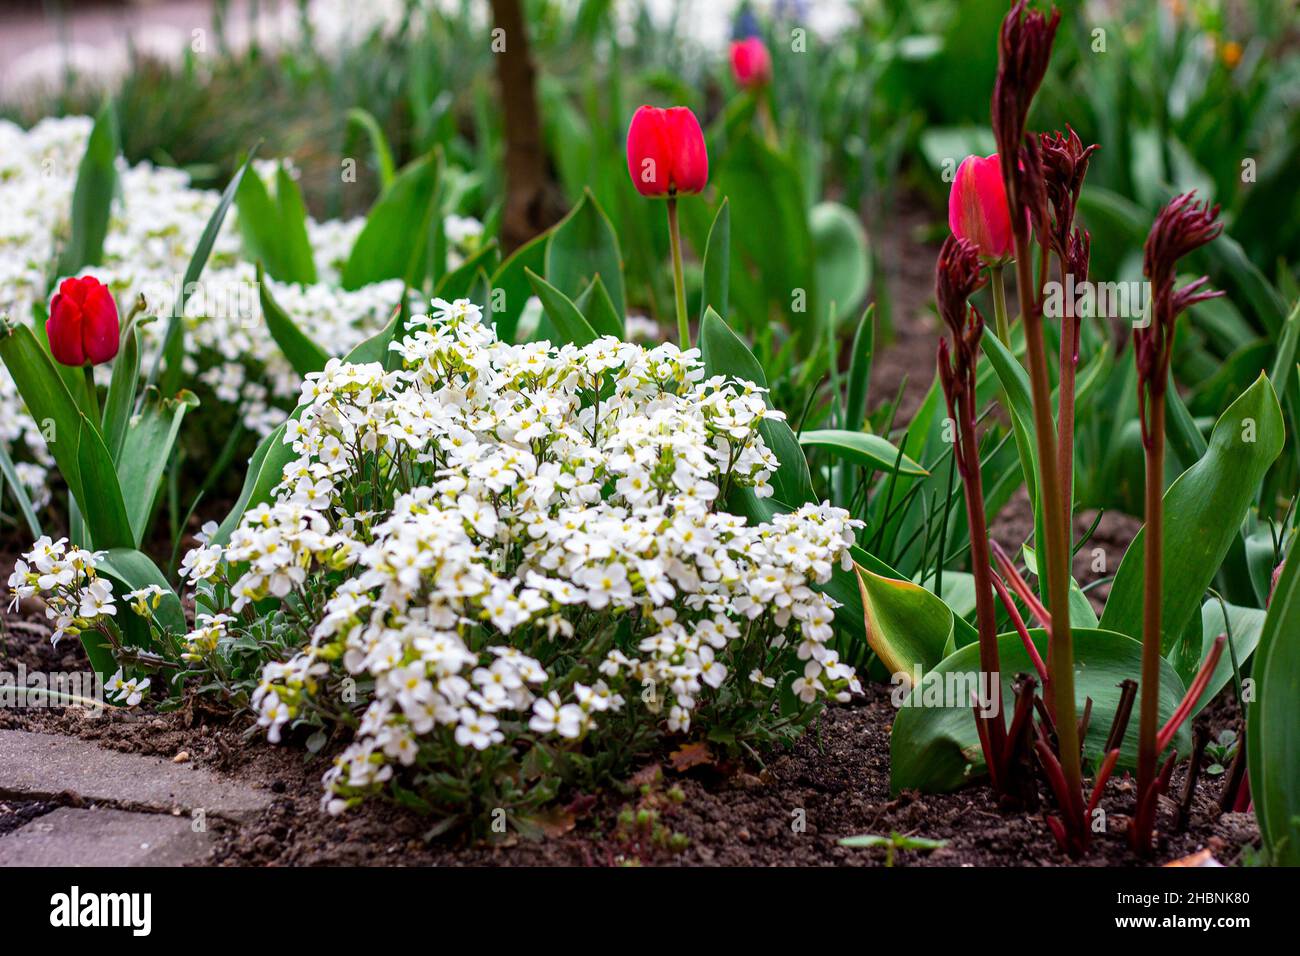 Bright colorful Tulips and Arabis caucasica flowers flowerbed with green leaves blossoms in the garden in spring and summer season. Stock Photo